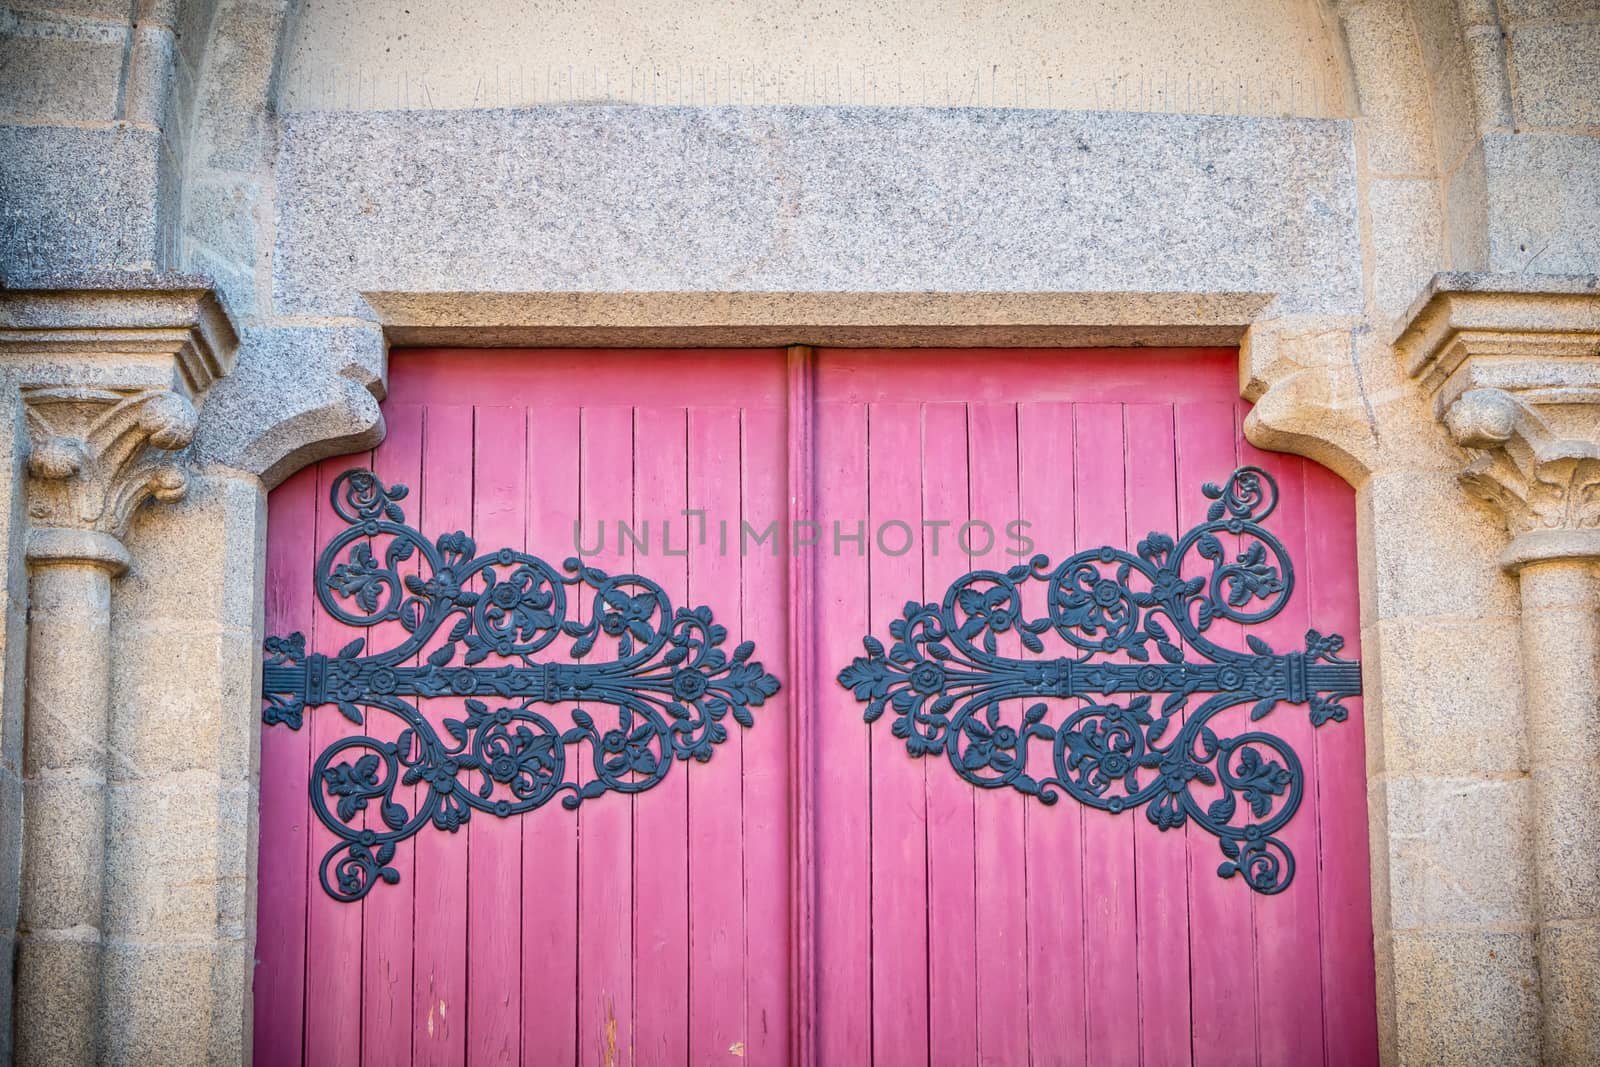 detail of the wooden door of Saint Jean-Baptiste Church in Montaigu, France